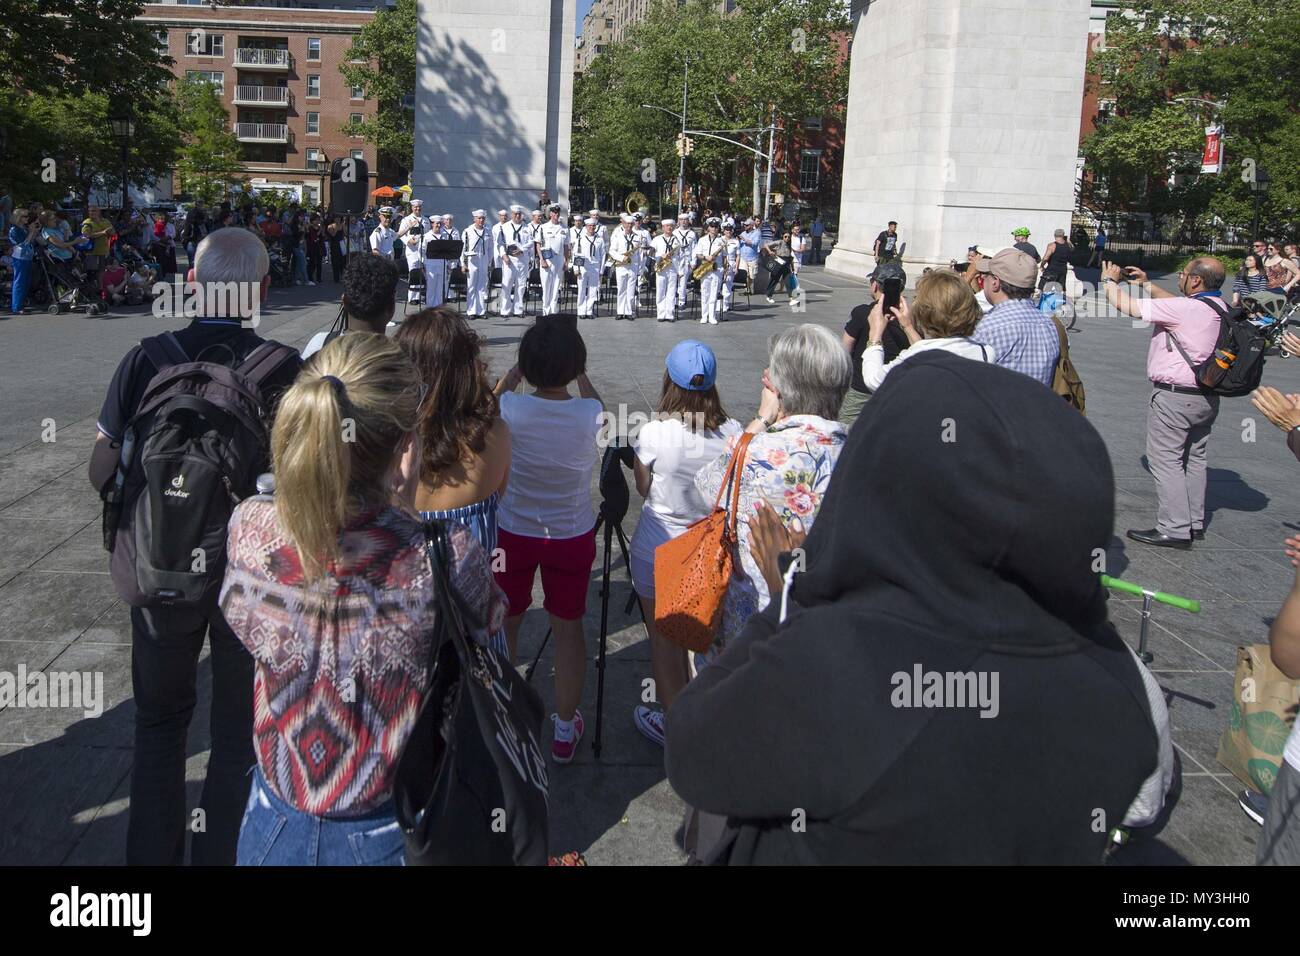 180524-N-BY095-0131 NEW YORK (May 24, 2018) Navy Band Northeast performs at Washington Square Park during Fleet Week New York (FWNY), May 24, 2018. Now in its 30th year FWNY is the city's time-honored celebration of the sea services. It is an unparalleled opportunity for the citizens of New York and the surrounding tri-state area to meet Sailors, Marines and Coast Guardsmen, as well as witness firsthand the latest capabilities of today's maritime services. (U.S. Navy photo by Mass Communication Specialist 3rd Class Maria I. Alvarez/Released). () Stock Photo